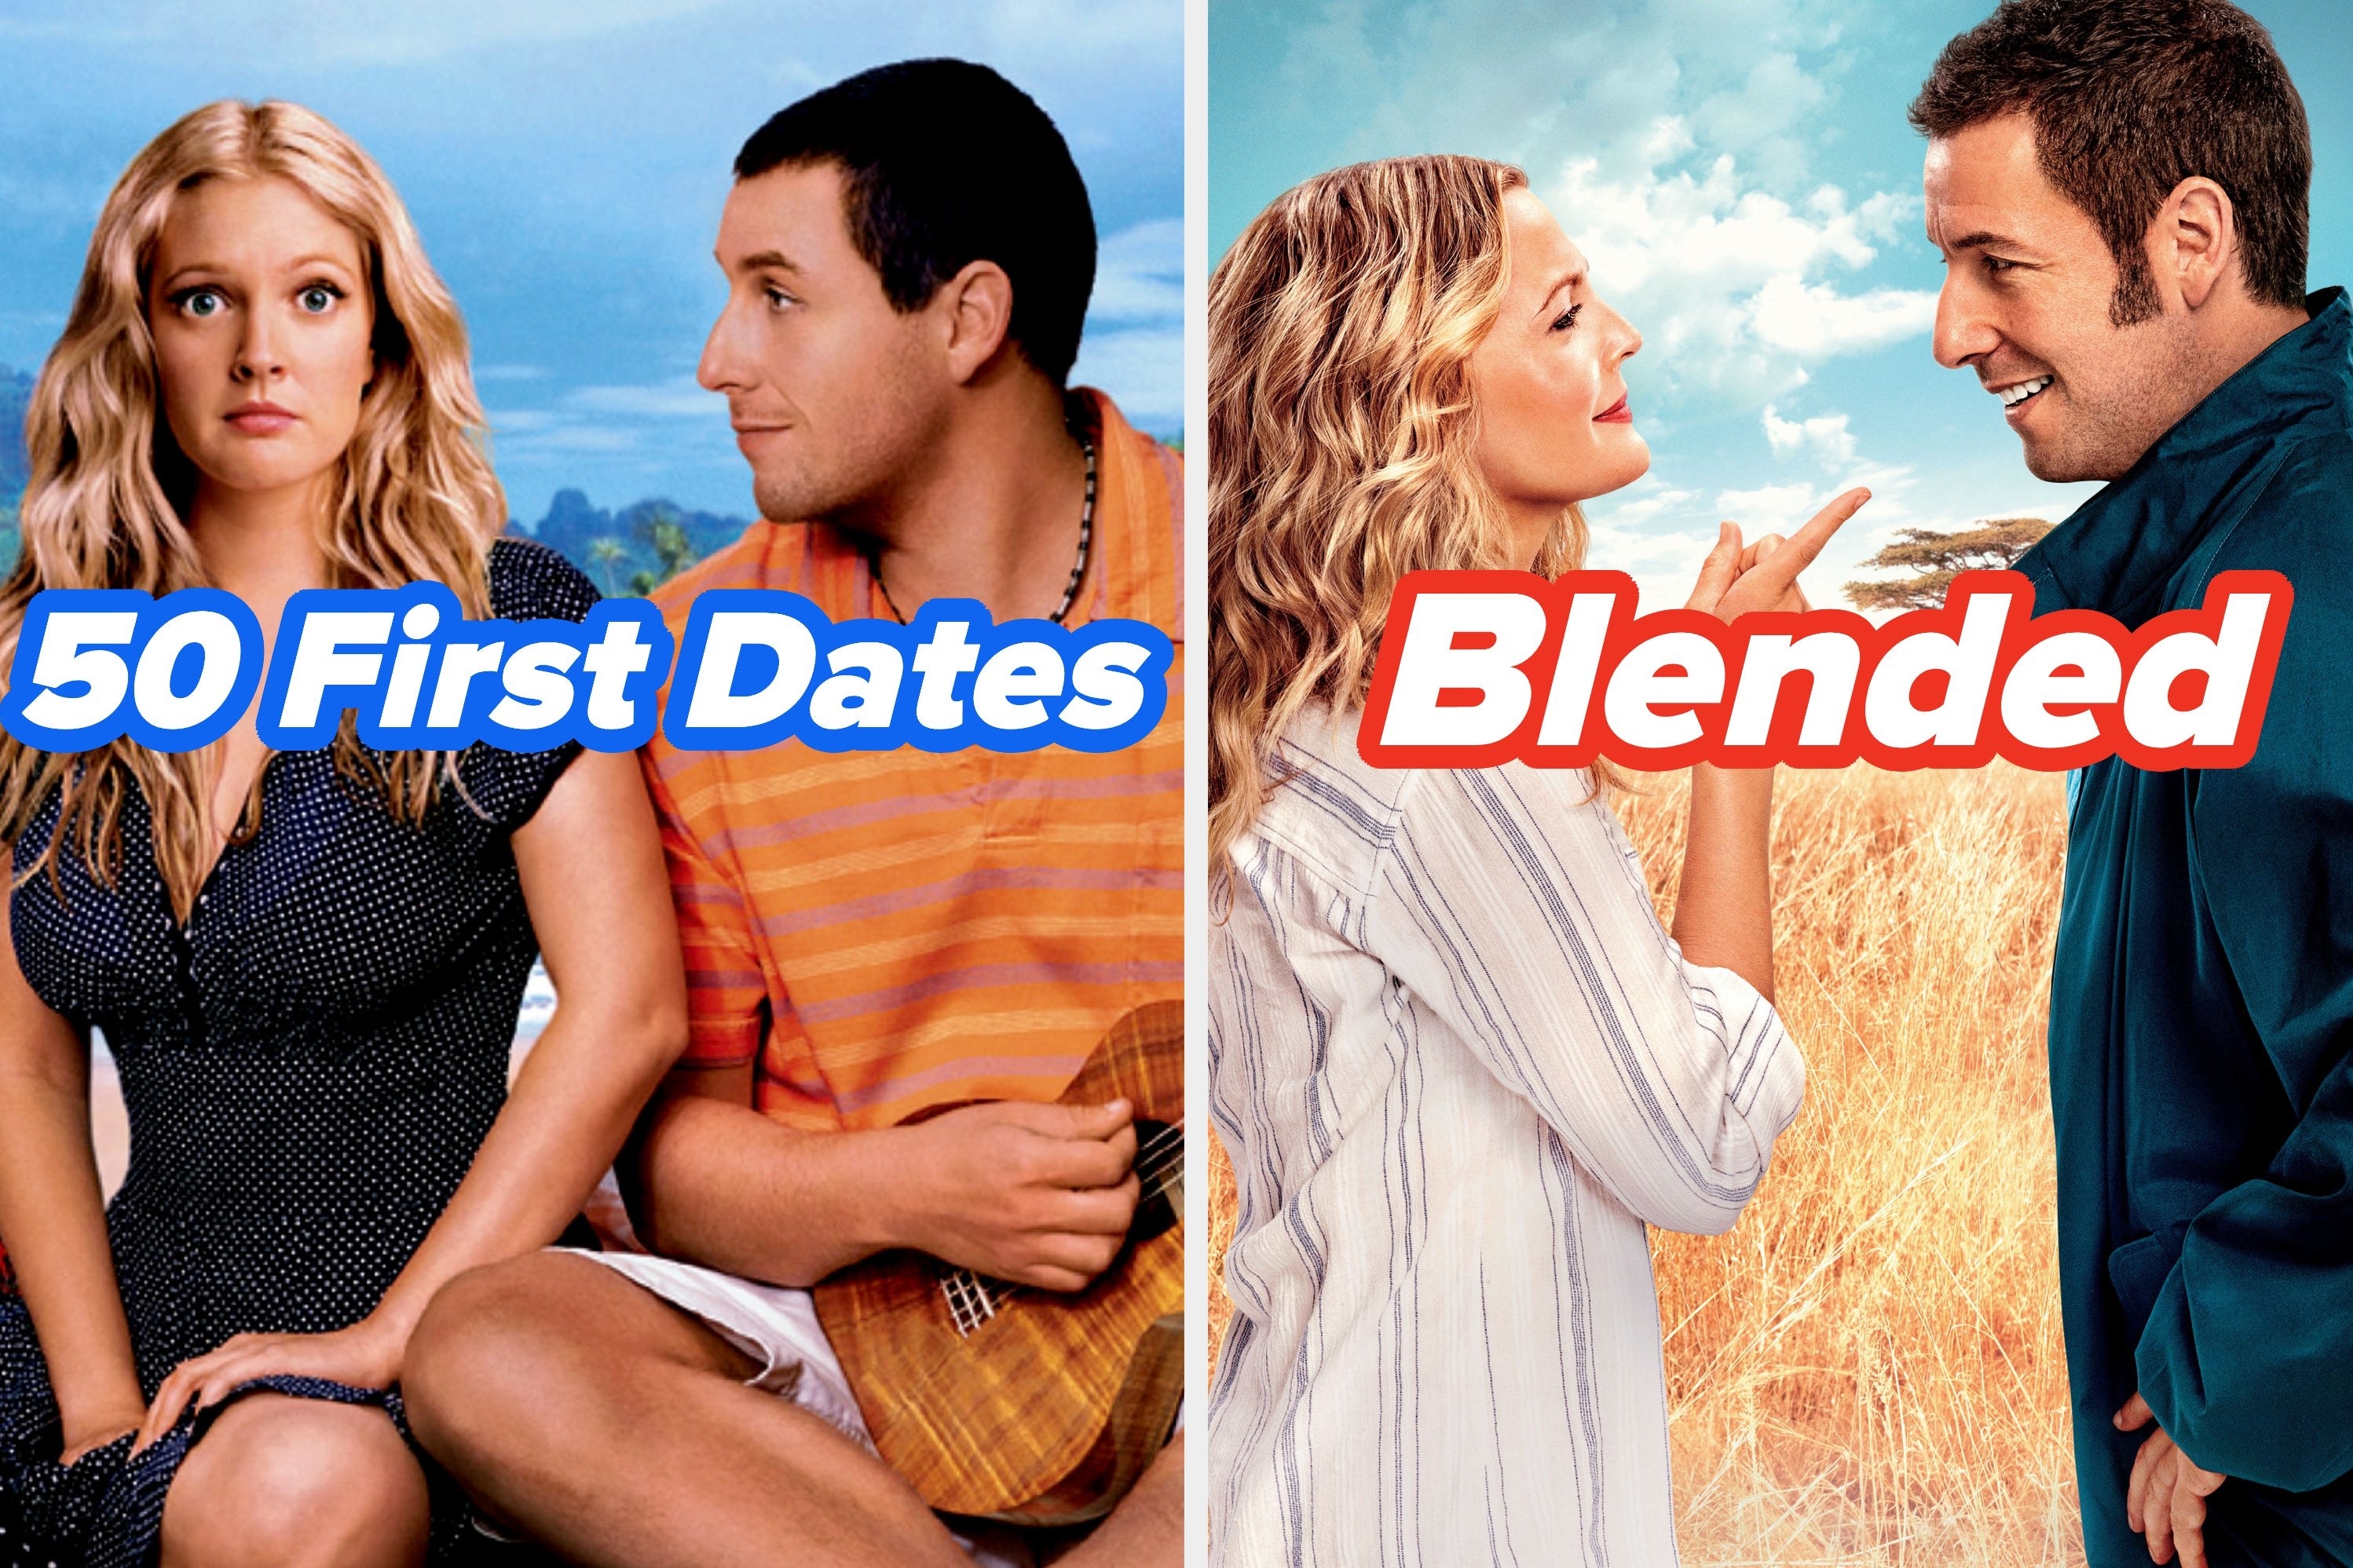 Two images: on the left, an image of the poster for &quot;50 First Dates&quot; and on the right, an image of the poster for &quot;Blended.&quot; Both images have their movie titles overlayed on top.